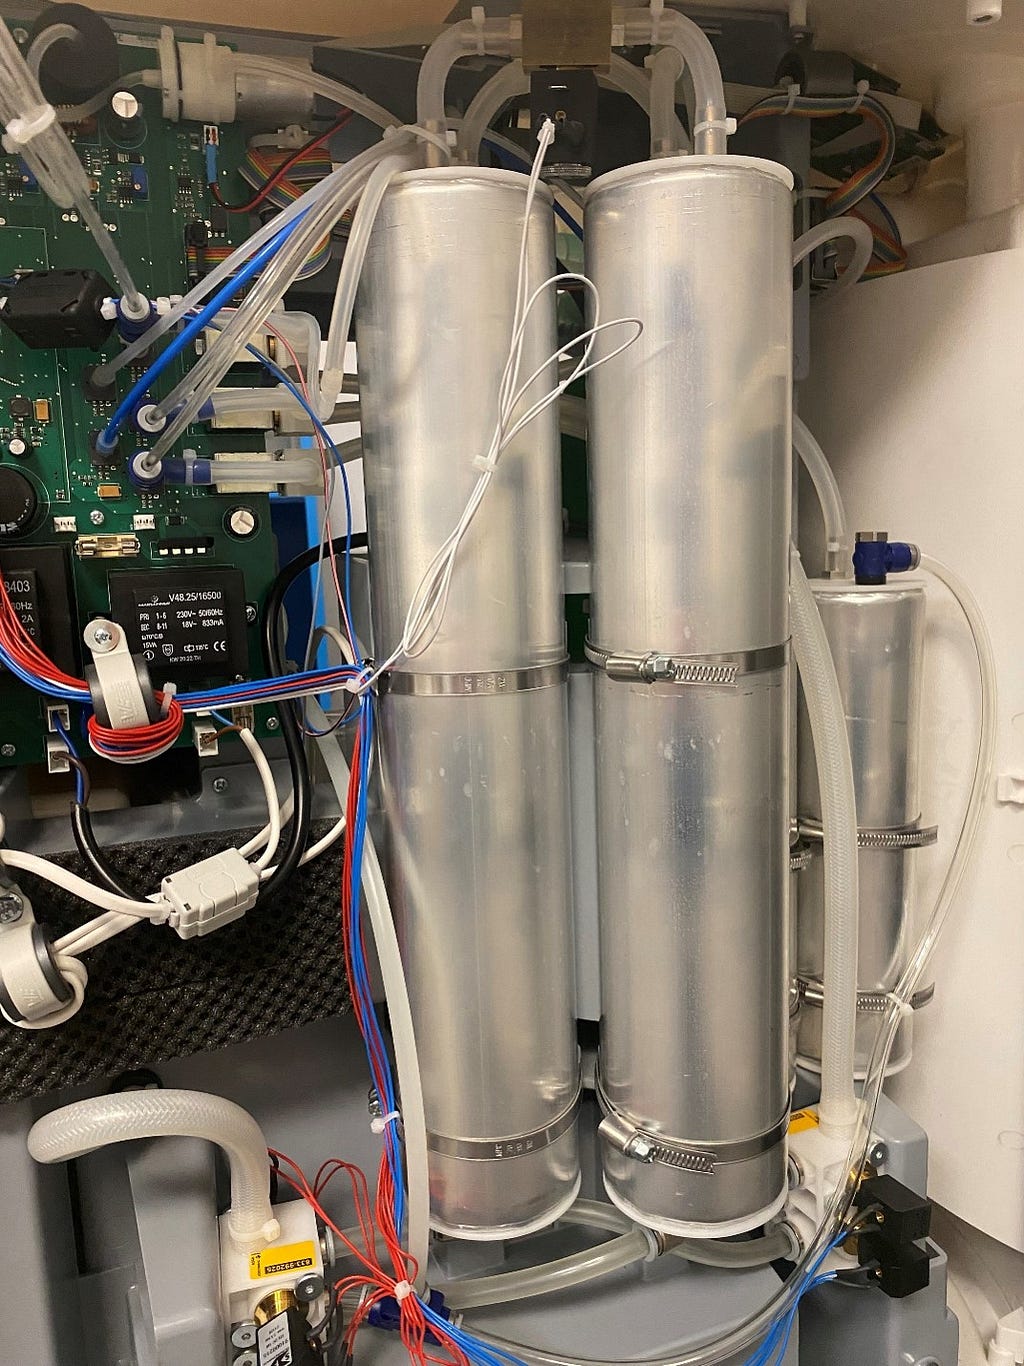 An image of the internal components of a prototype OxyLink 10 oxygen concentrator.